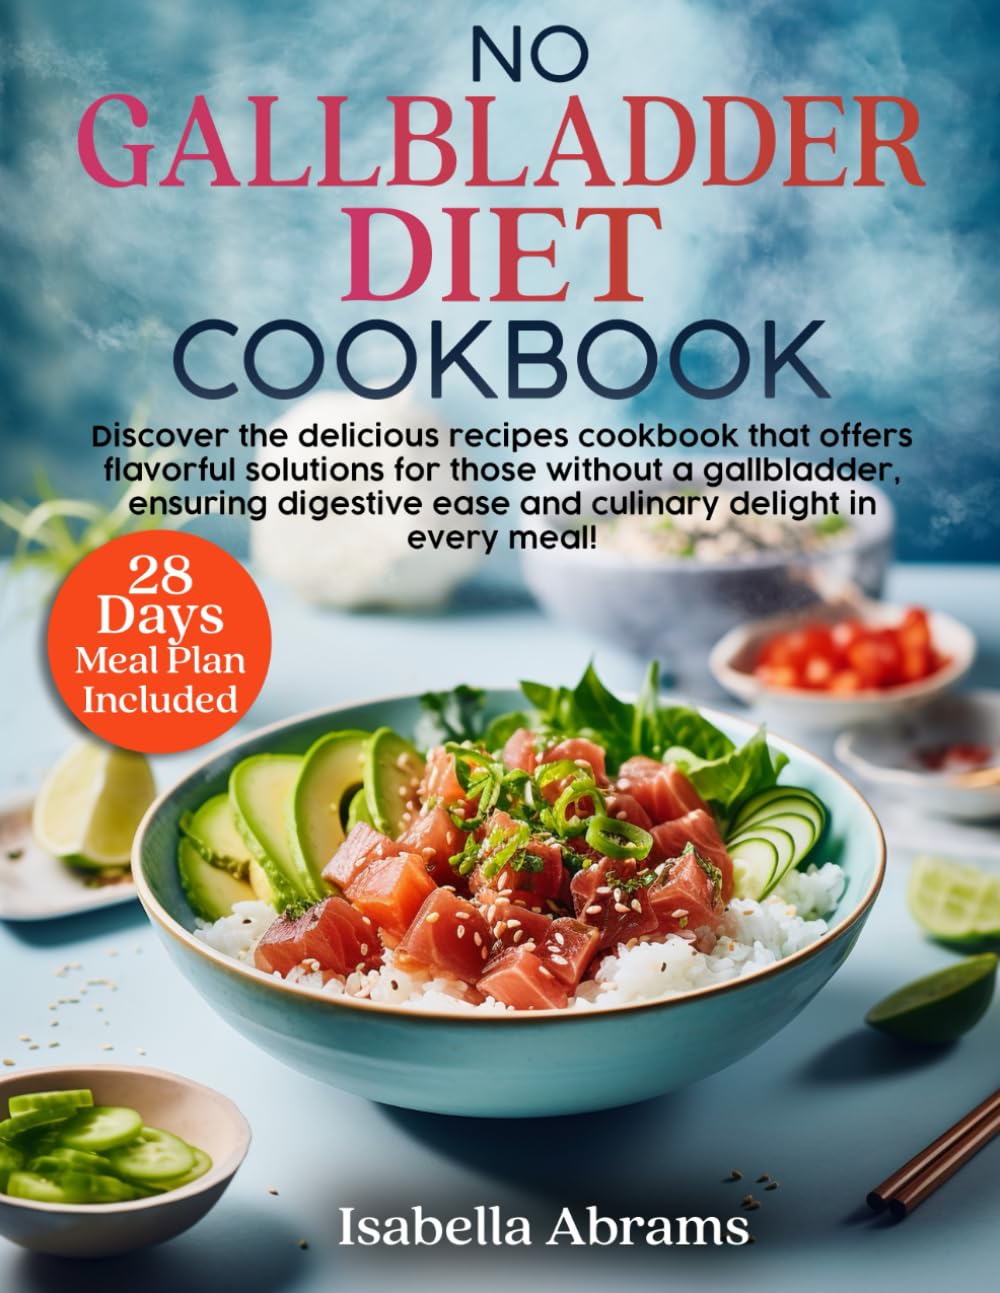 No Gallbladder Diet Cookbook: 2000 days of healthy , delicious & easy recipes for beginners | The Simple Food Guide for Health & Wellness Post Gallbladder Removal Surgery | 28 Day Meal Plan Included